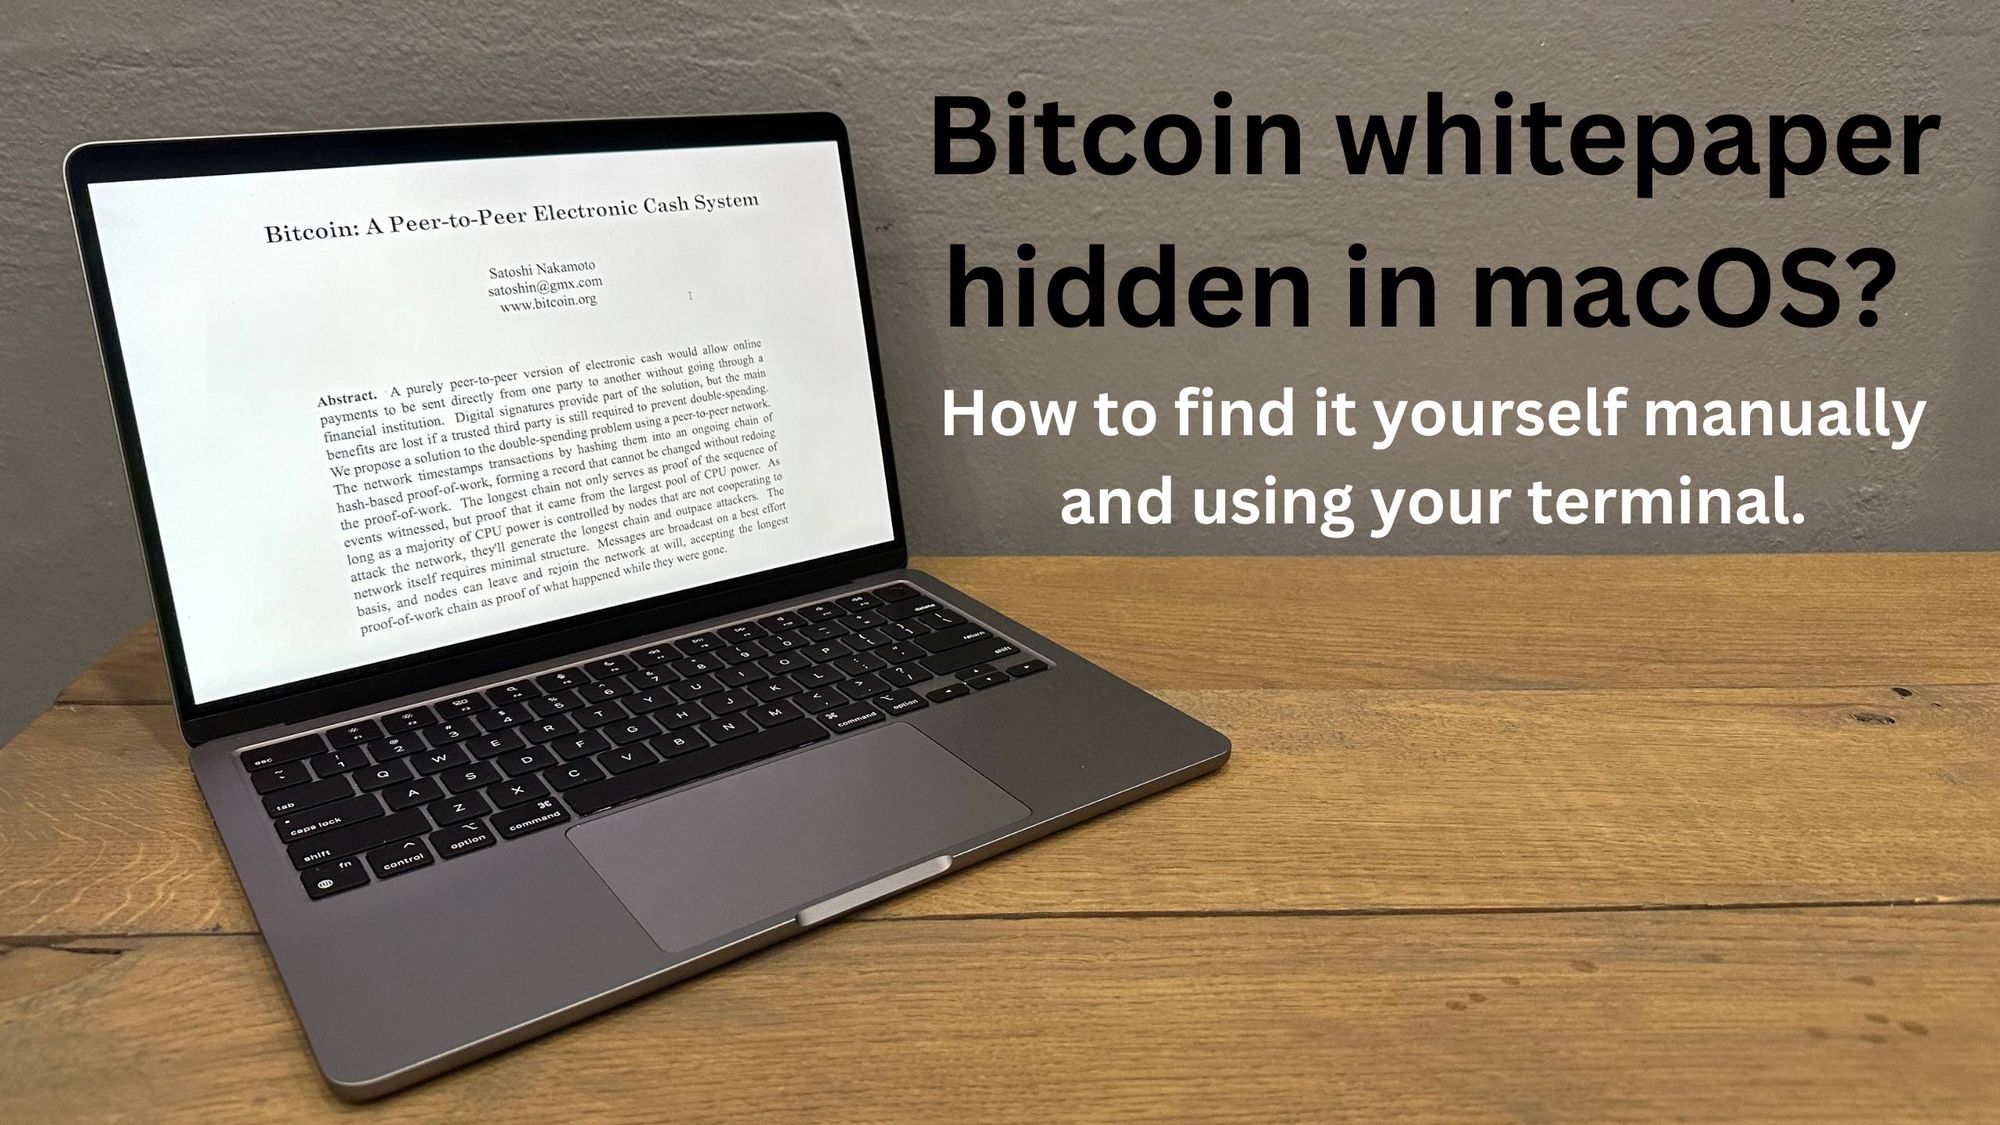 The Bitcoin white paper has been hidden on Macs since Here’s how to find it